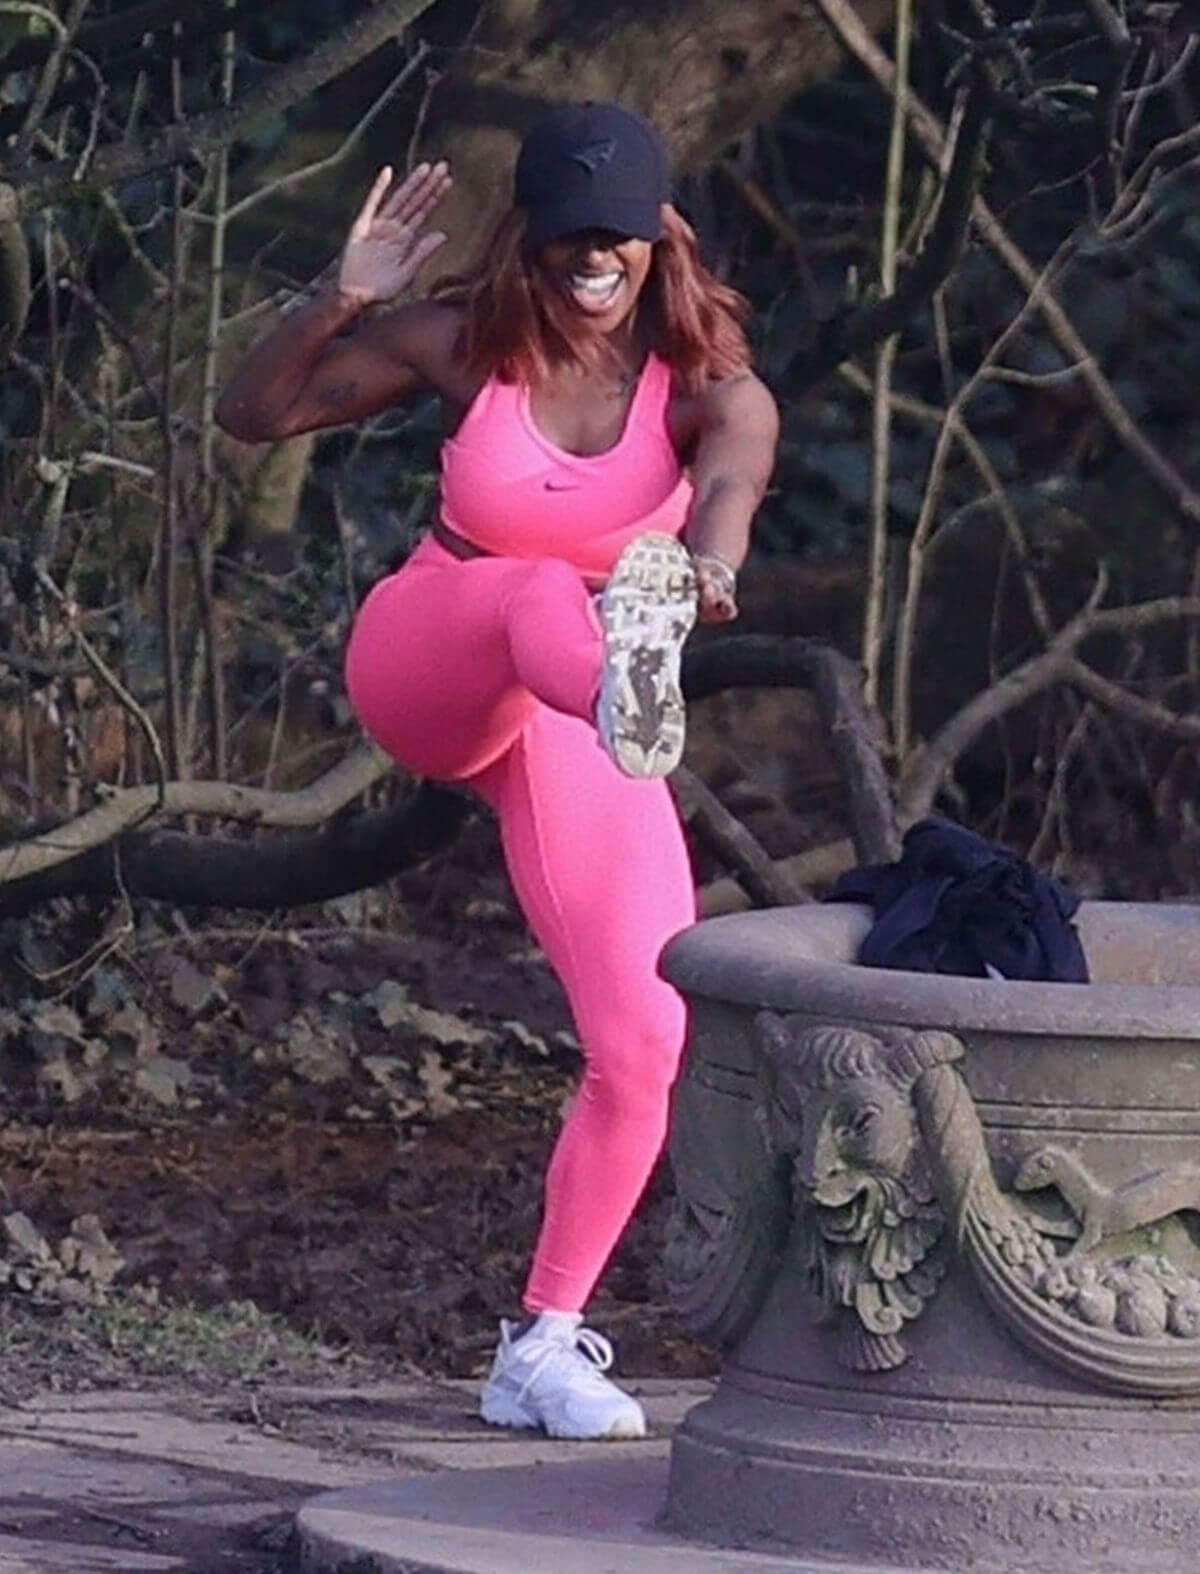 Alexandra Burke Complete Her Sports Look in Bold Pink Sportswear as She Workout at a Park in London 03/10/2021